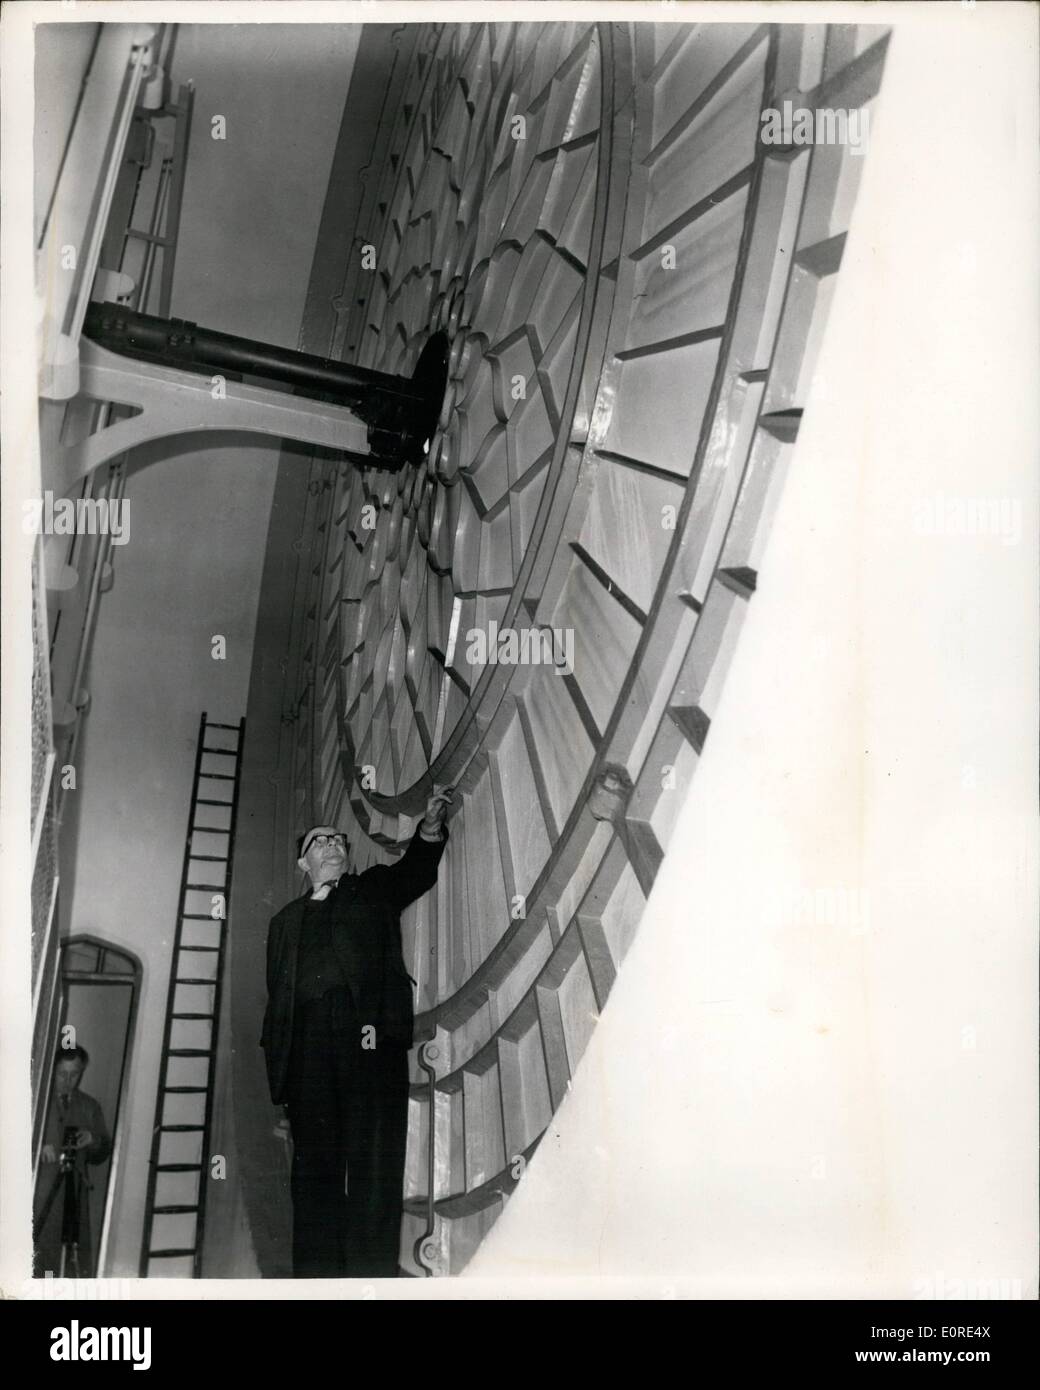 Apr. 04, 1959 - This Year Is The Hundredth Birthday of Big Ben This year is the hundredth birthday of Big Ben. The first day of Stock Photo